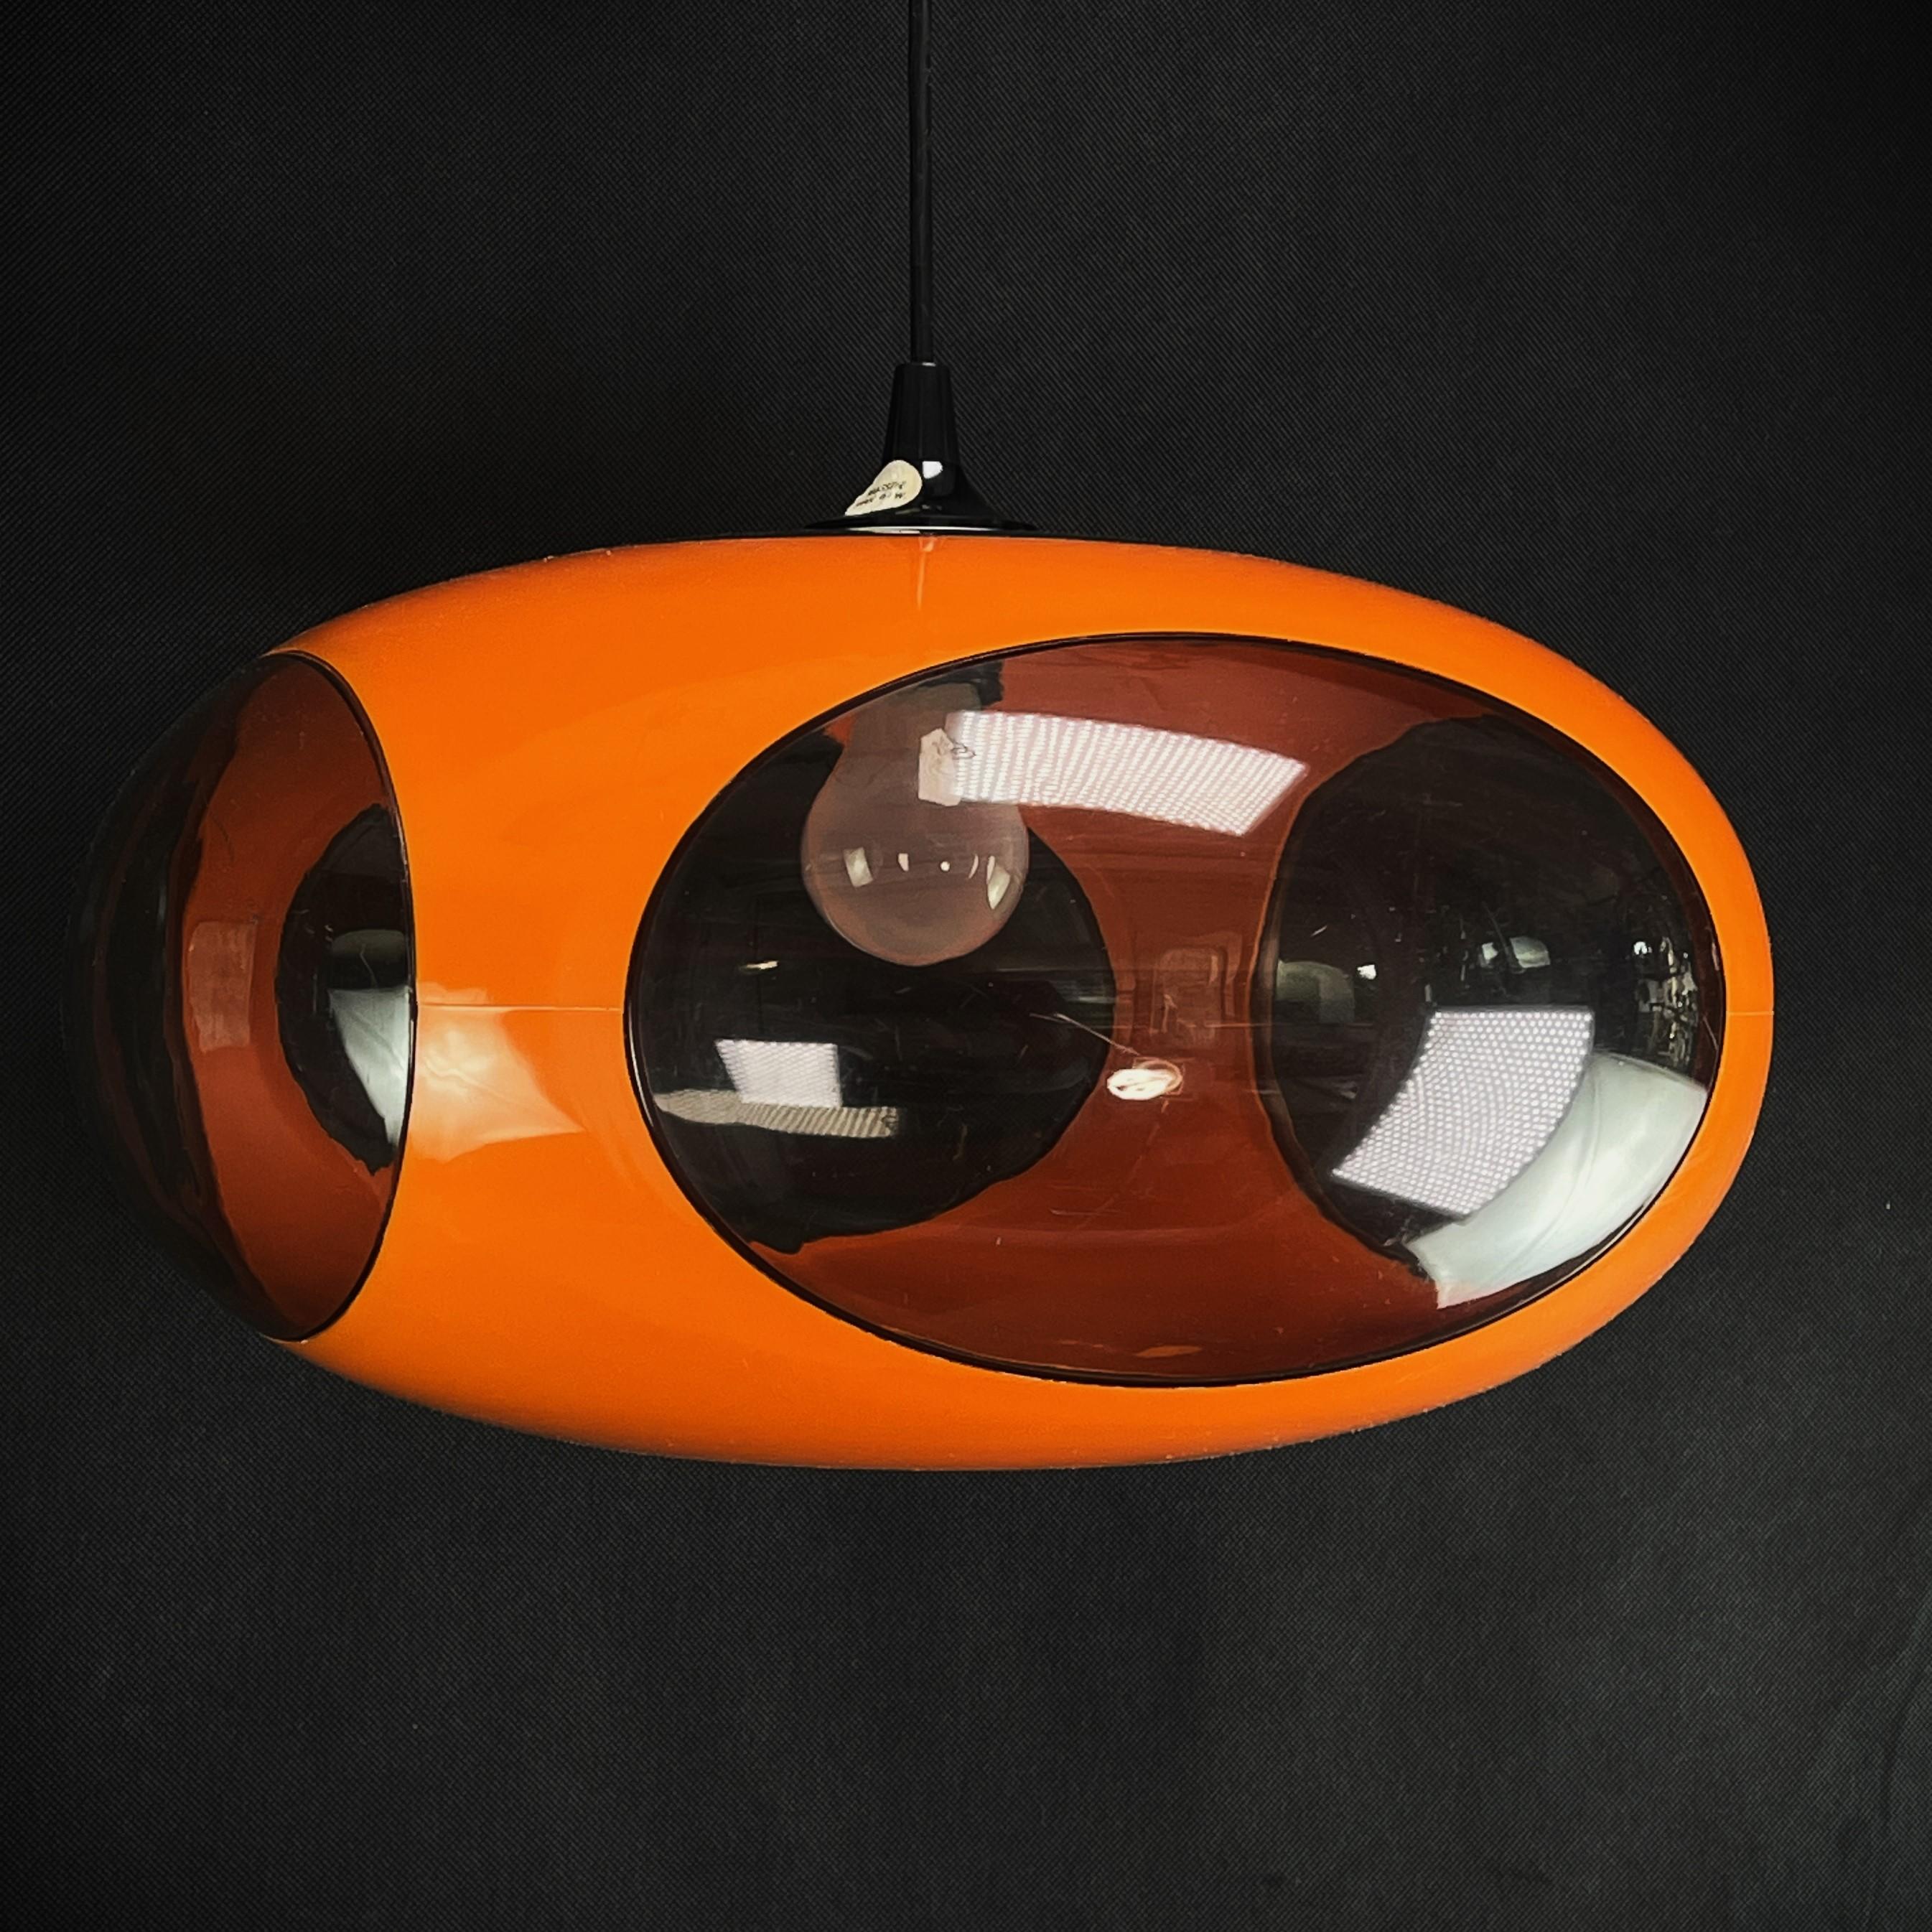 Orange UFO ceiling lamp from Massive Belgium - 1970s.

The beautiful and rare lamp is a real design Classic from the 70s. This lamp in an extraordinary design is a highlight for every lounge interior of the Panton-Eames era. This extraordinary